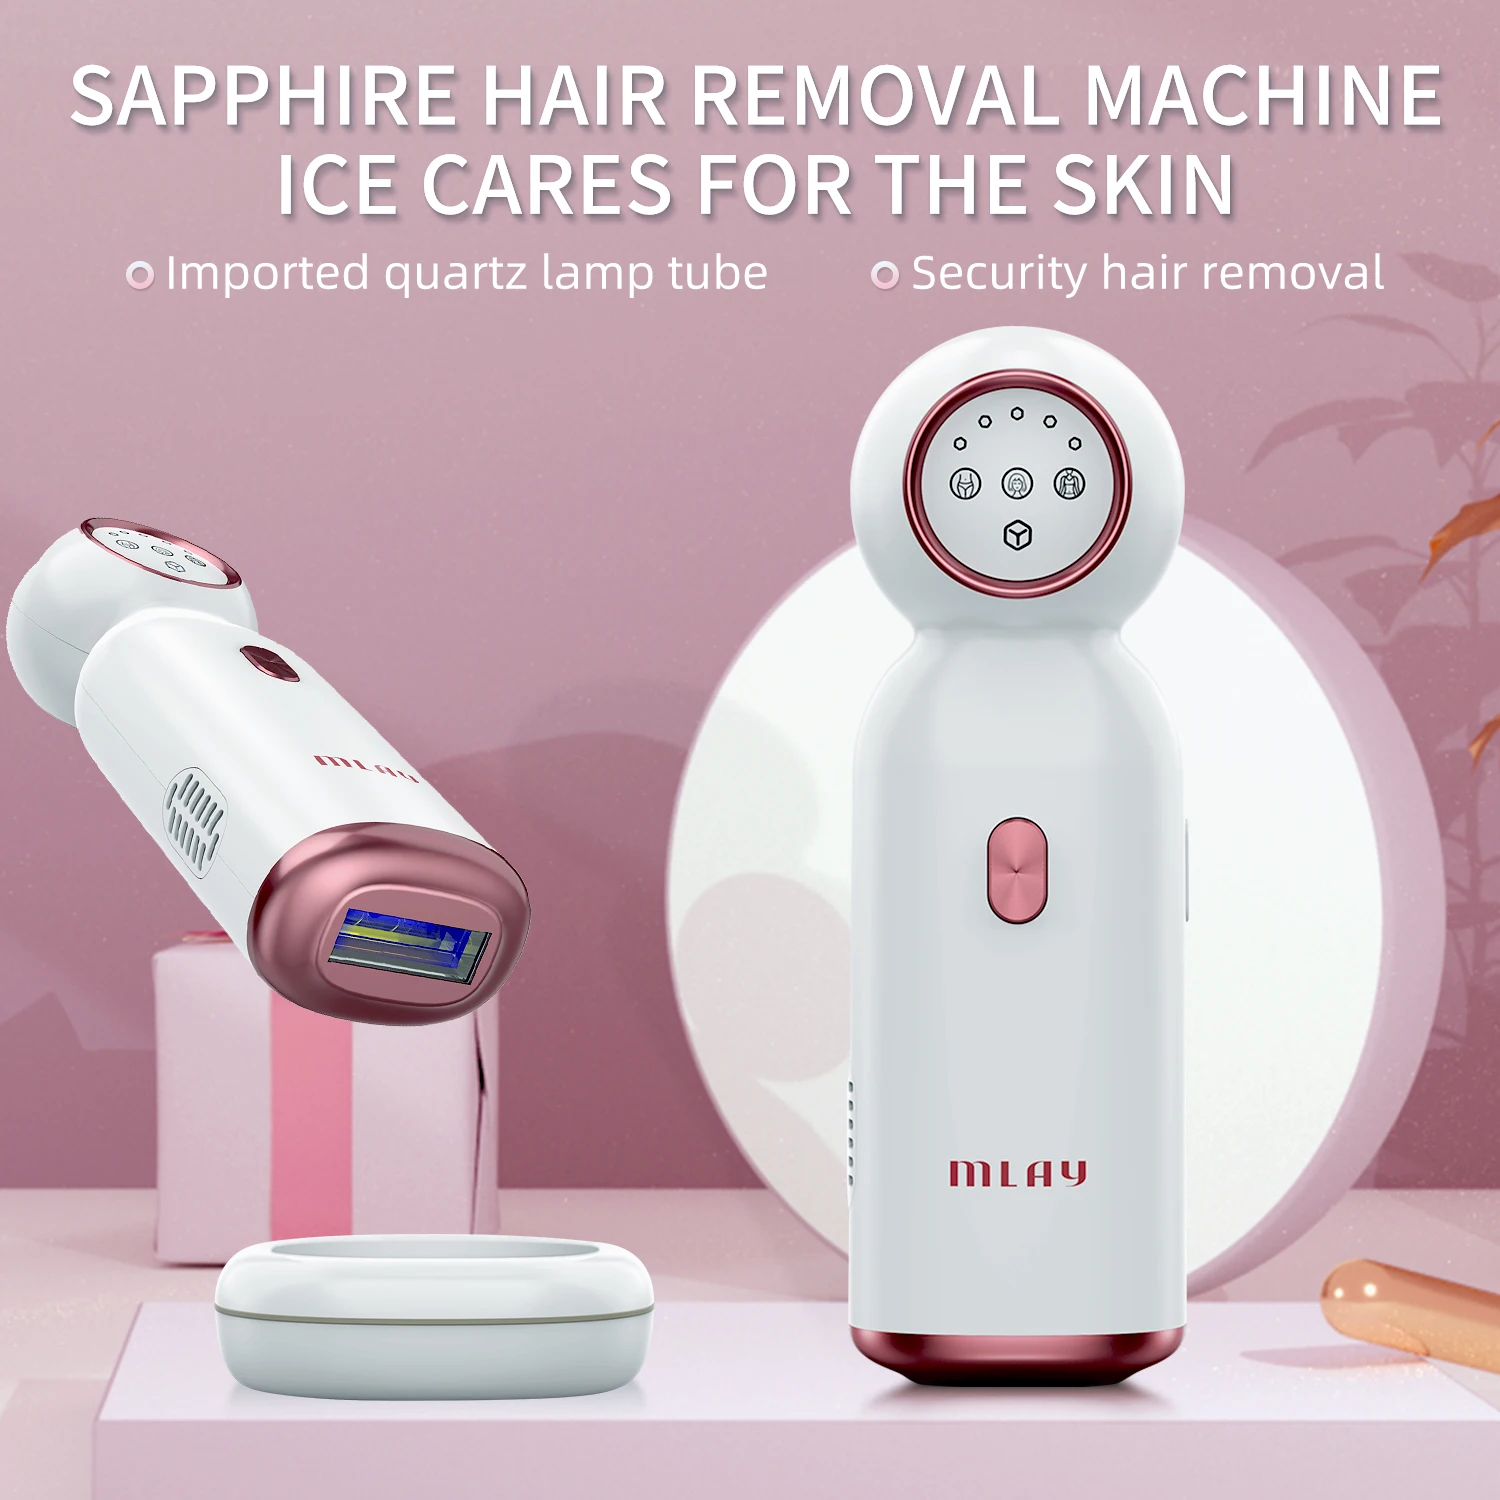 Mlay T10 Home Use IPL Hair Removal Device Special Design Cooling System Painless and Permanent for Body Hair Removal